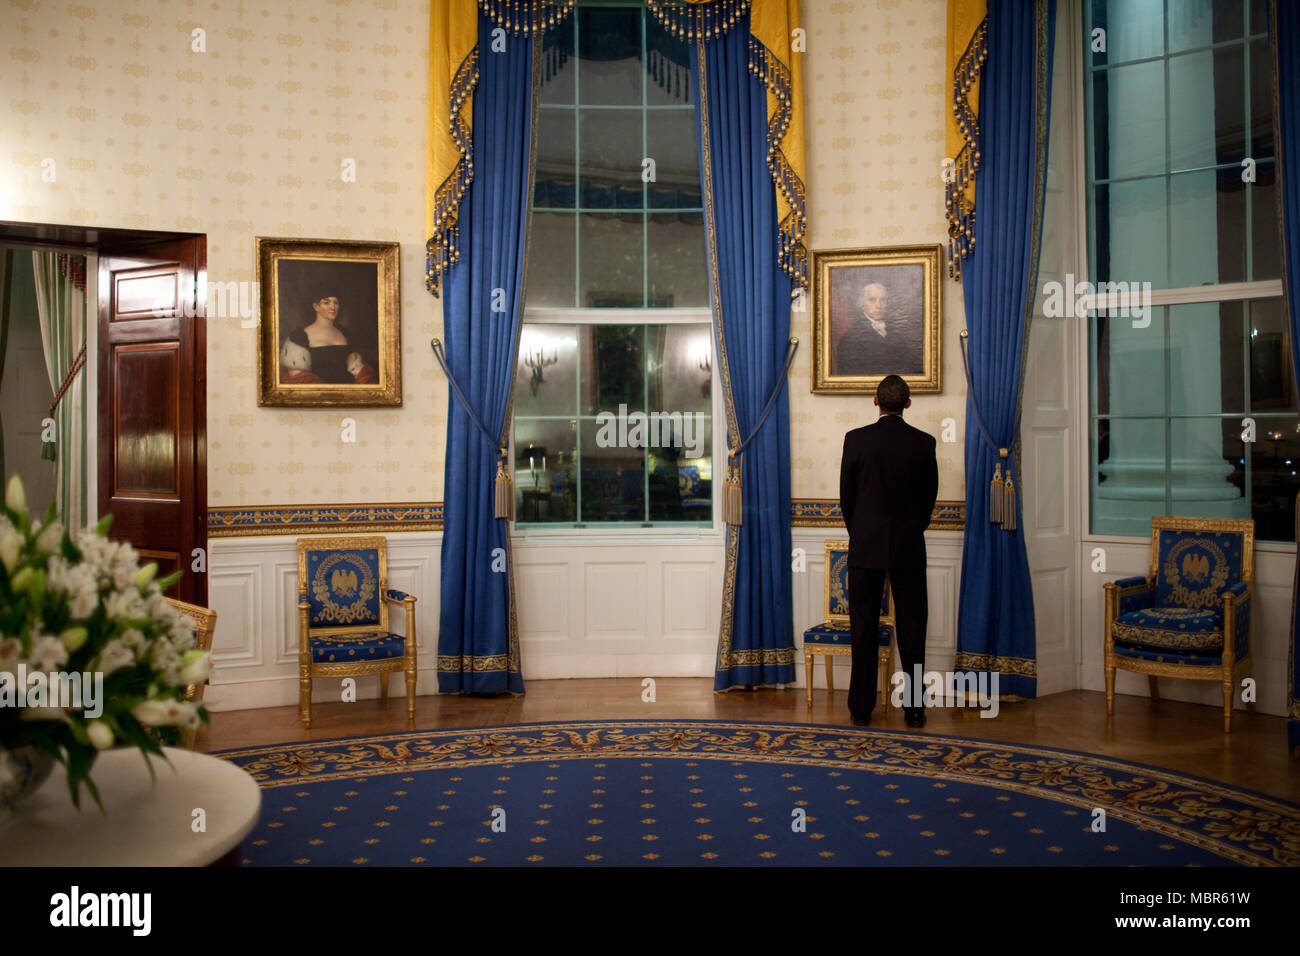 President Barack Obama looks at a portrait of President John Adams while waiting in the Blue Room prior to his press conference in the East Room 2/9/09..Official White House Photo by Pete Souza Stock Photo